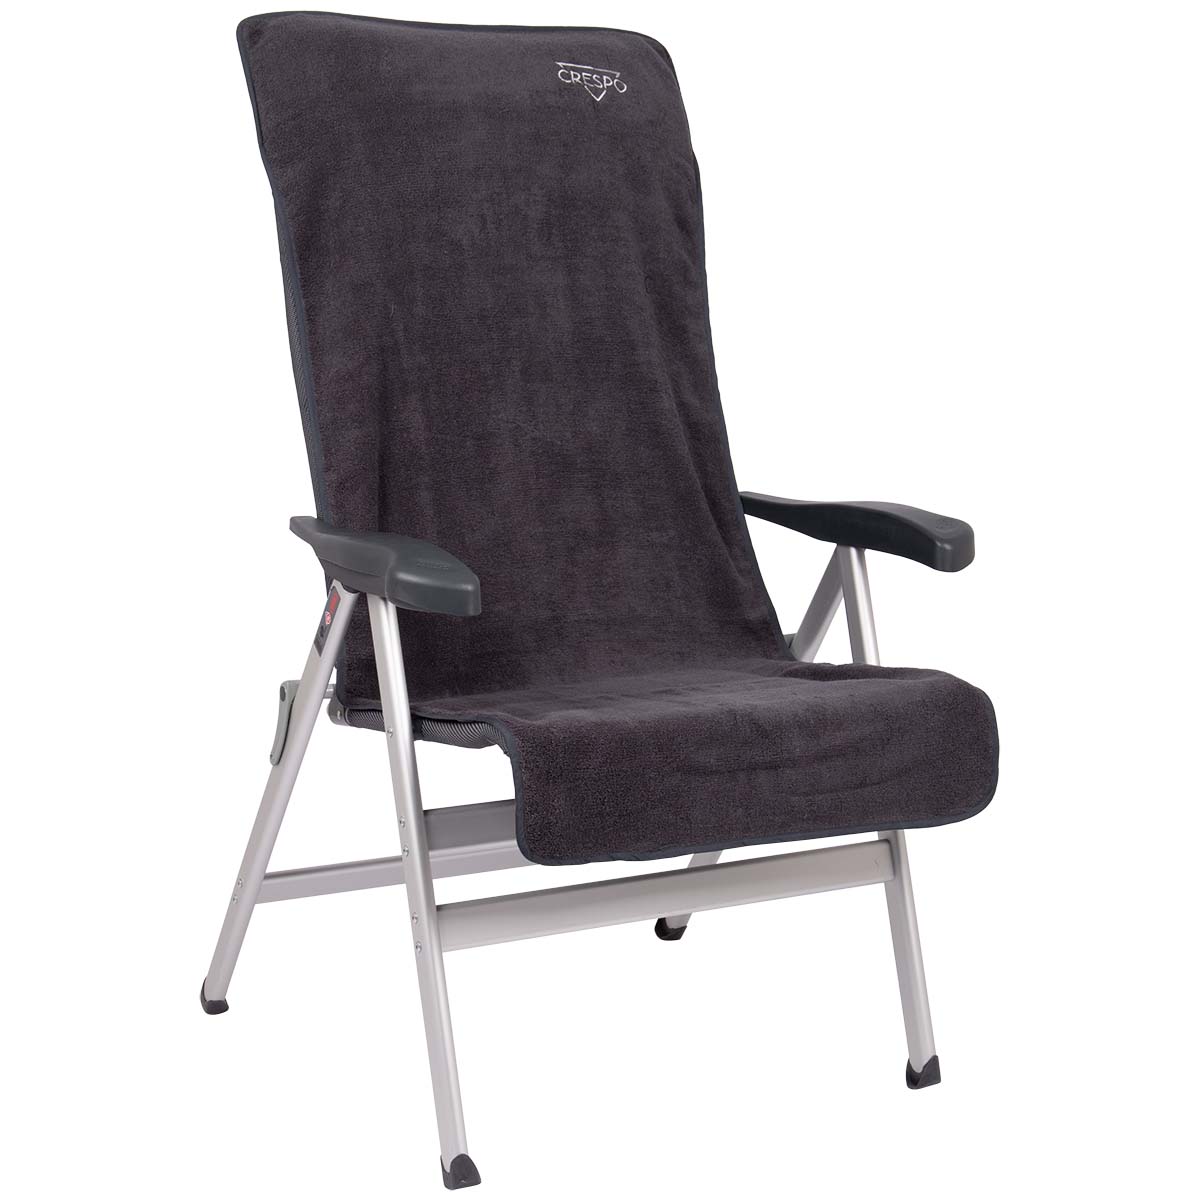 1149900 Crespo - Terry cloth cover M - Chairs - Grey